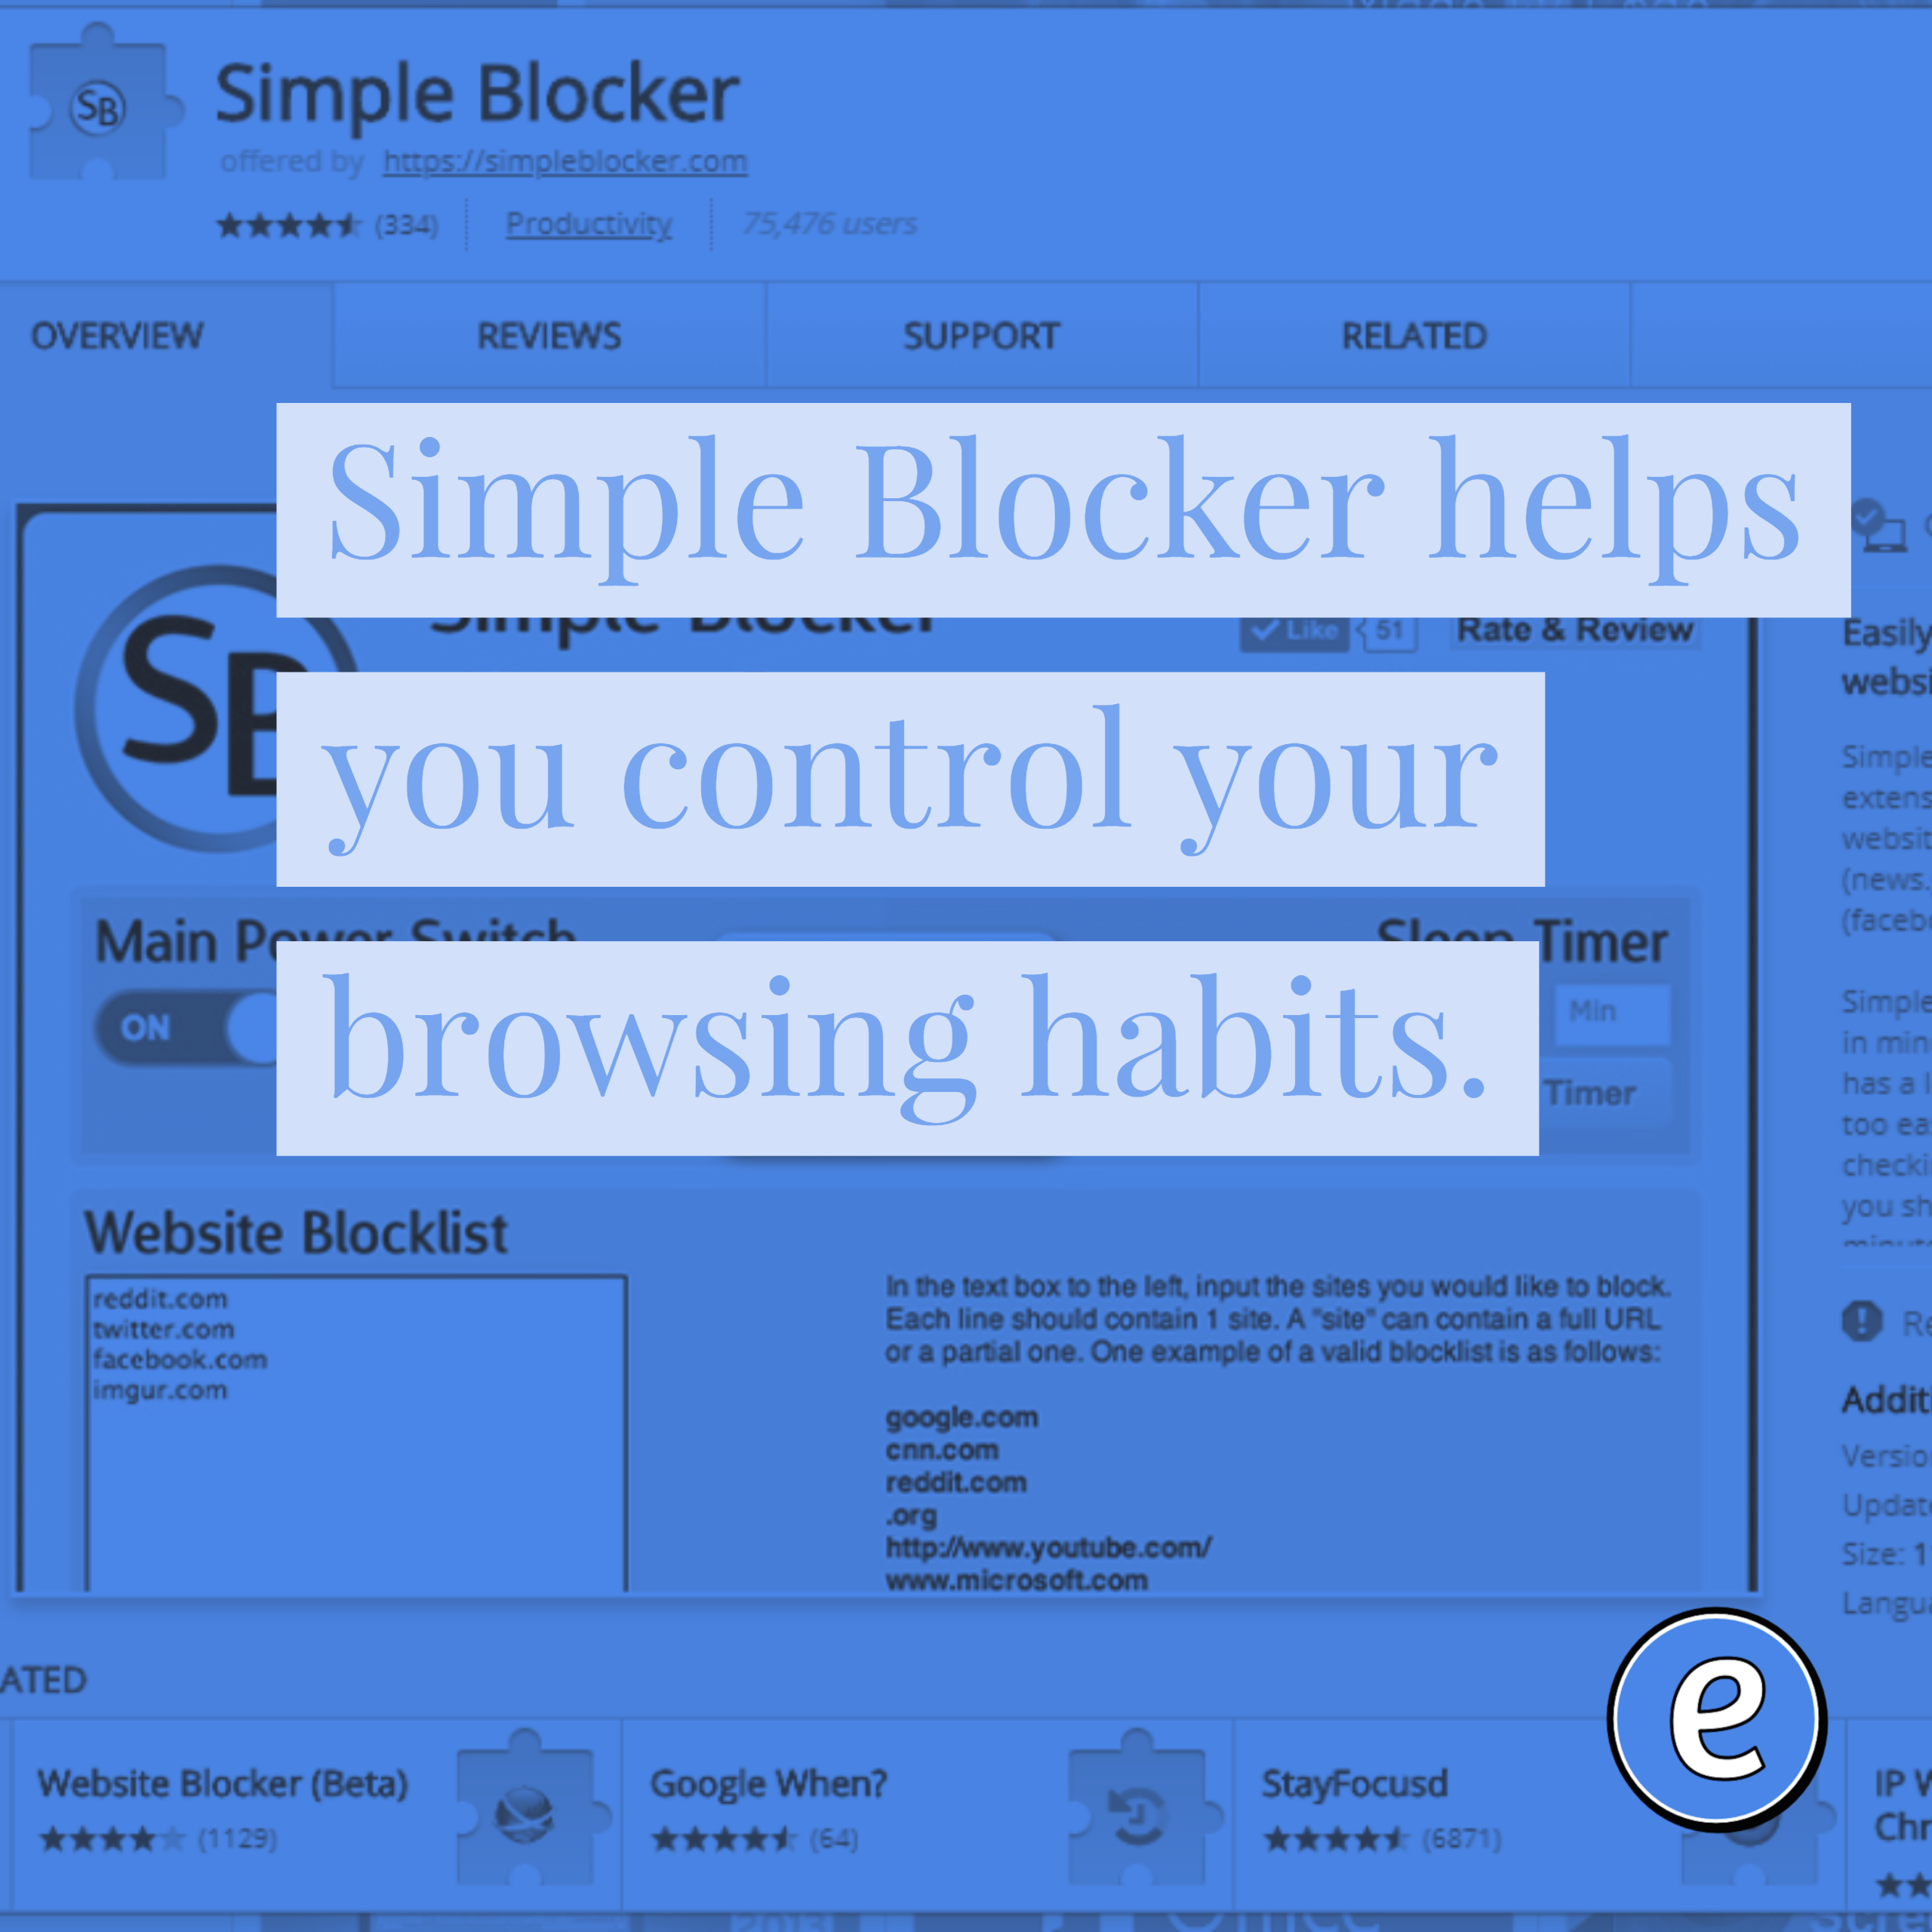 Simple Blocker helps you control your browsing habits